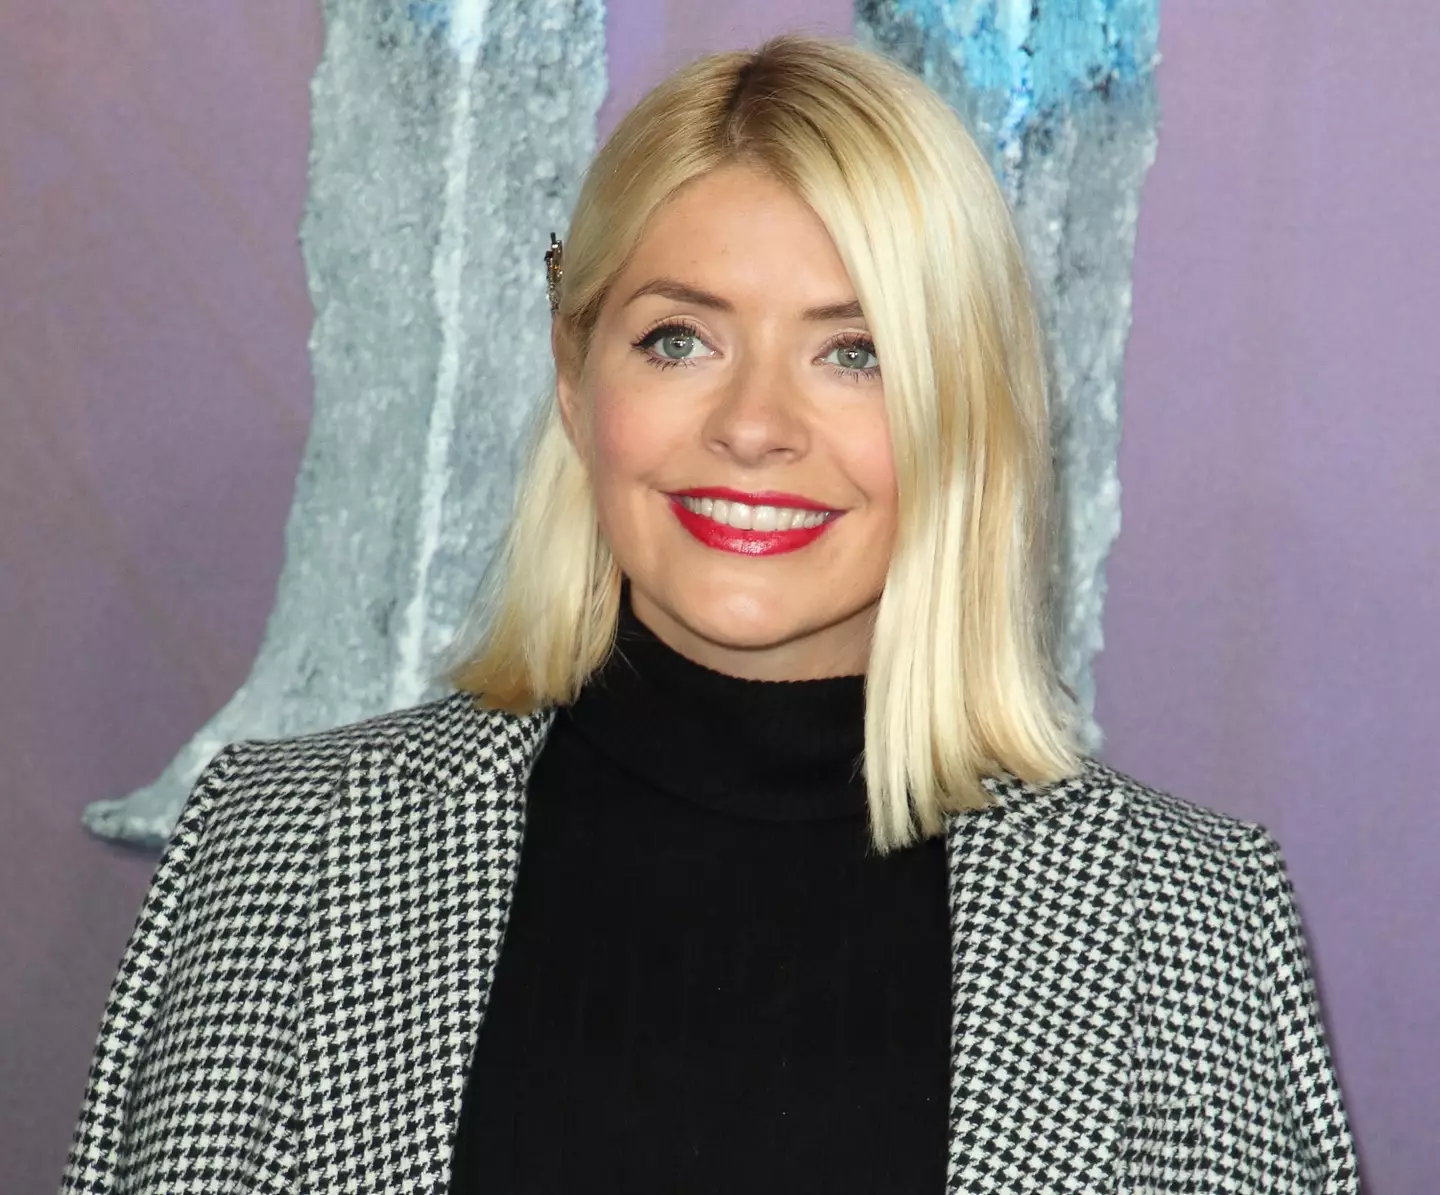 Holly Willoughby is prepared for a fight.